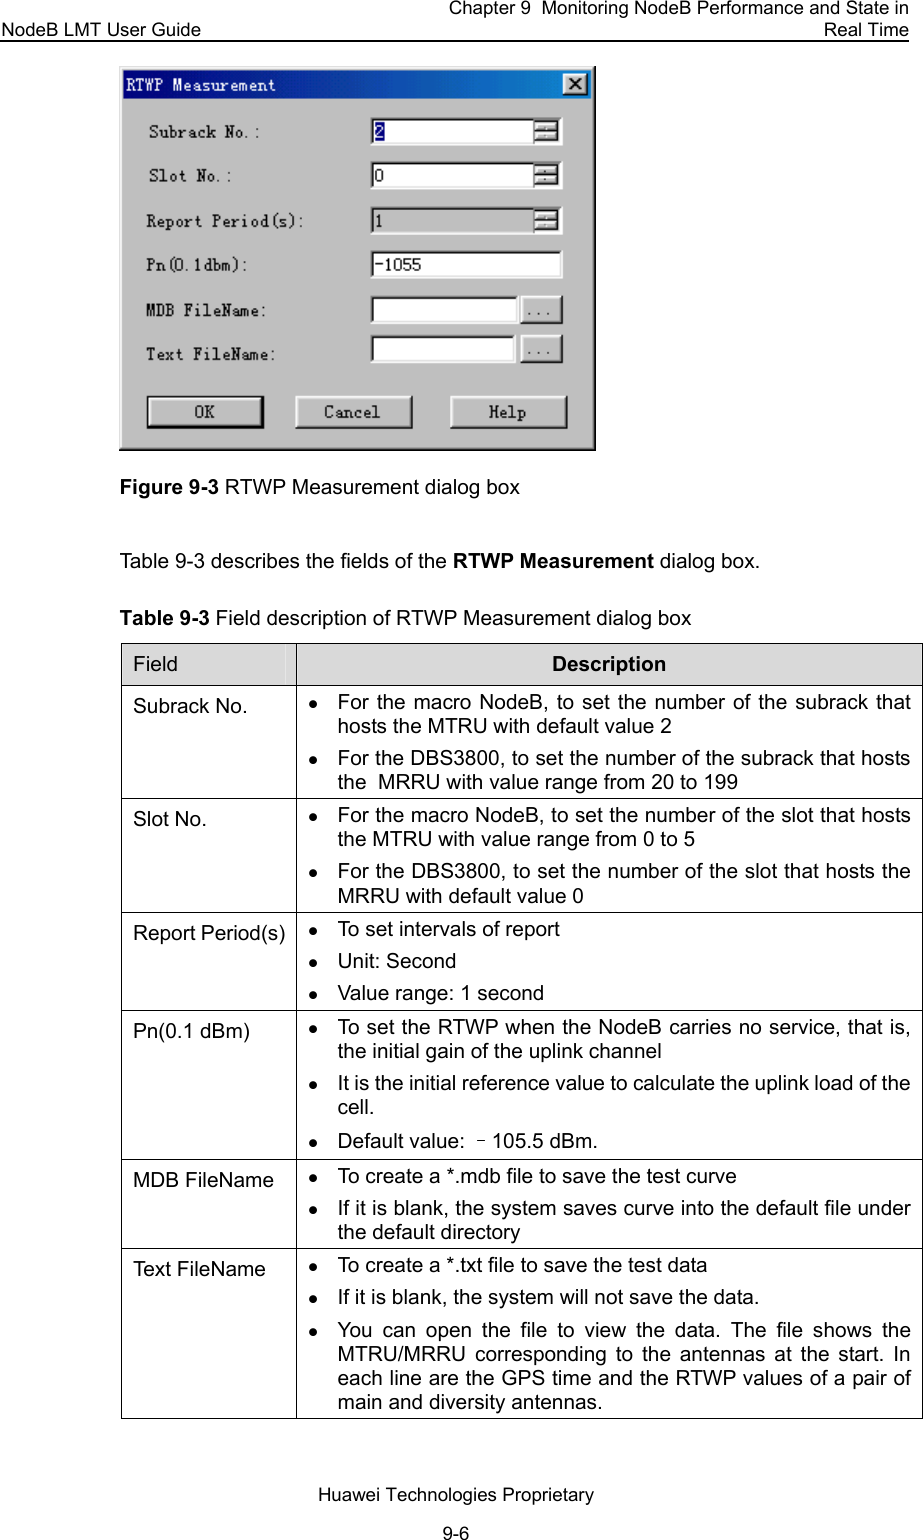 NodeB LMT User Guide Chapter 9  Monitoring NodeB Performance and State in Real Time Huawei Technologies Proprietary 9-6  Figure 9-3 RTWP Measurement dialog box  Table 9-3 describes the fields of the RTWP Measurement dialog box.  Table 9-3 Field description of RTWP Measurement dialog box  Field   Description  Subrack No. z For the macro NodeB, to set the number of the subrack that hosts the MTRU with default value 2  z For the DBS3800, to set the number of the subrack that hosts the  MRRU with value range from 20 to 199  Slot No. z For the macro NodeB, to set the number of the slot that hosts the MTRU with value range from 0 to 5  z For the DBS3800, to set the number of the slot that hosts the MRRU with default value 0  Report Period(s) z To set intervals of report z Unit: Second z Value range: 1 second Pn(0.1 dBm) z To set the RTWP when the NodeB carries no service, that is, the initial gain of the uplink channel z It is the initial reference value to calculate the uplink load of the cell. z Default value: –105.5 dBm. MDB FileName z To create a *.mdb file to save the test curve z If it is blank, the system saves curve into the default file under the default directory Text FileName z To create a *.txt file to save the test data z If it is blank, the system will not save the data. z You can open the file to view the data. The file shows the MTRU/MRRU corresponding to the antennas at the start. In each line are the GPS time and the RTWP values of a pair of main and diversity antennas.  